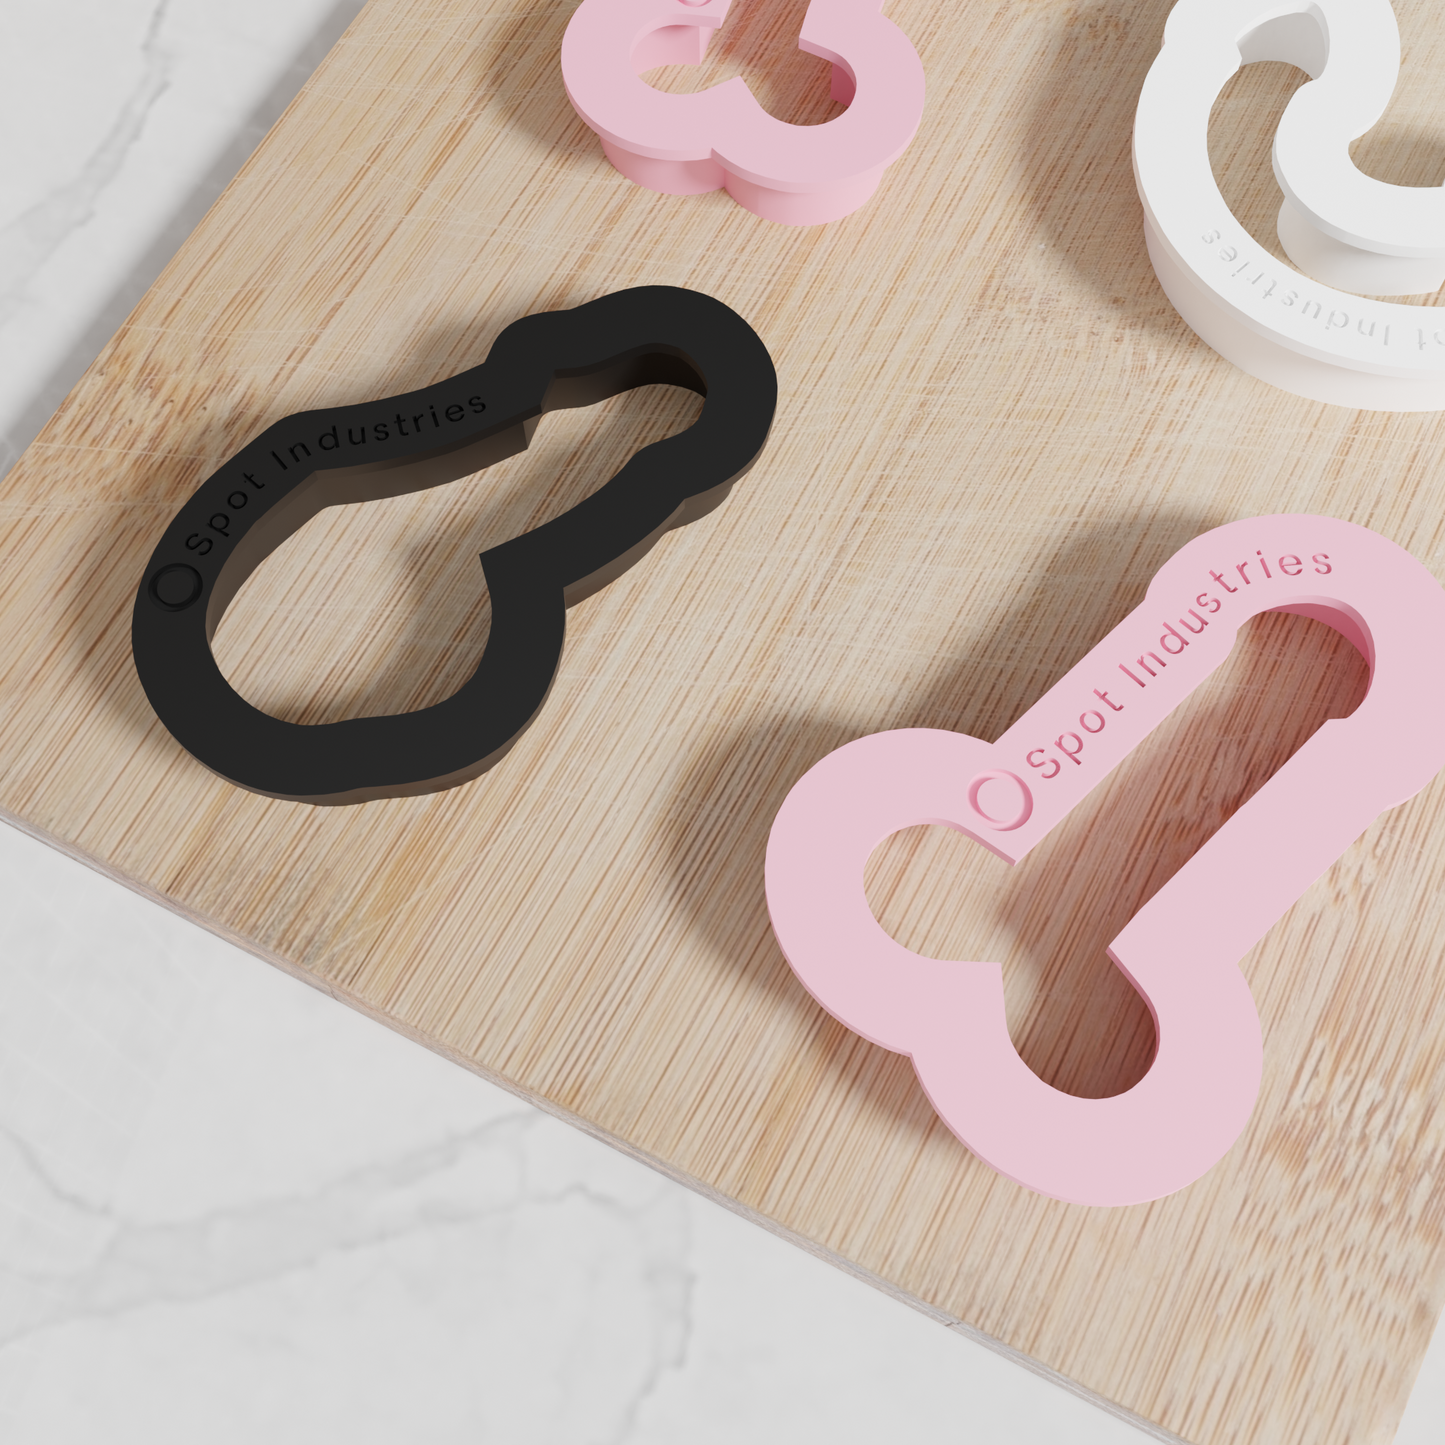 Penis Cookie Cutters. Set of 6 Unique Penis Cookie Cutters. All Designs From Shower To Grower, Four Sizes, Tons of Colors!